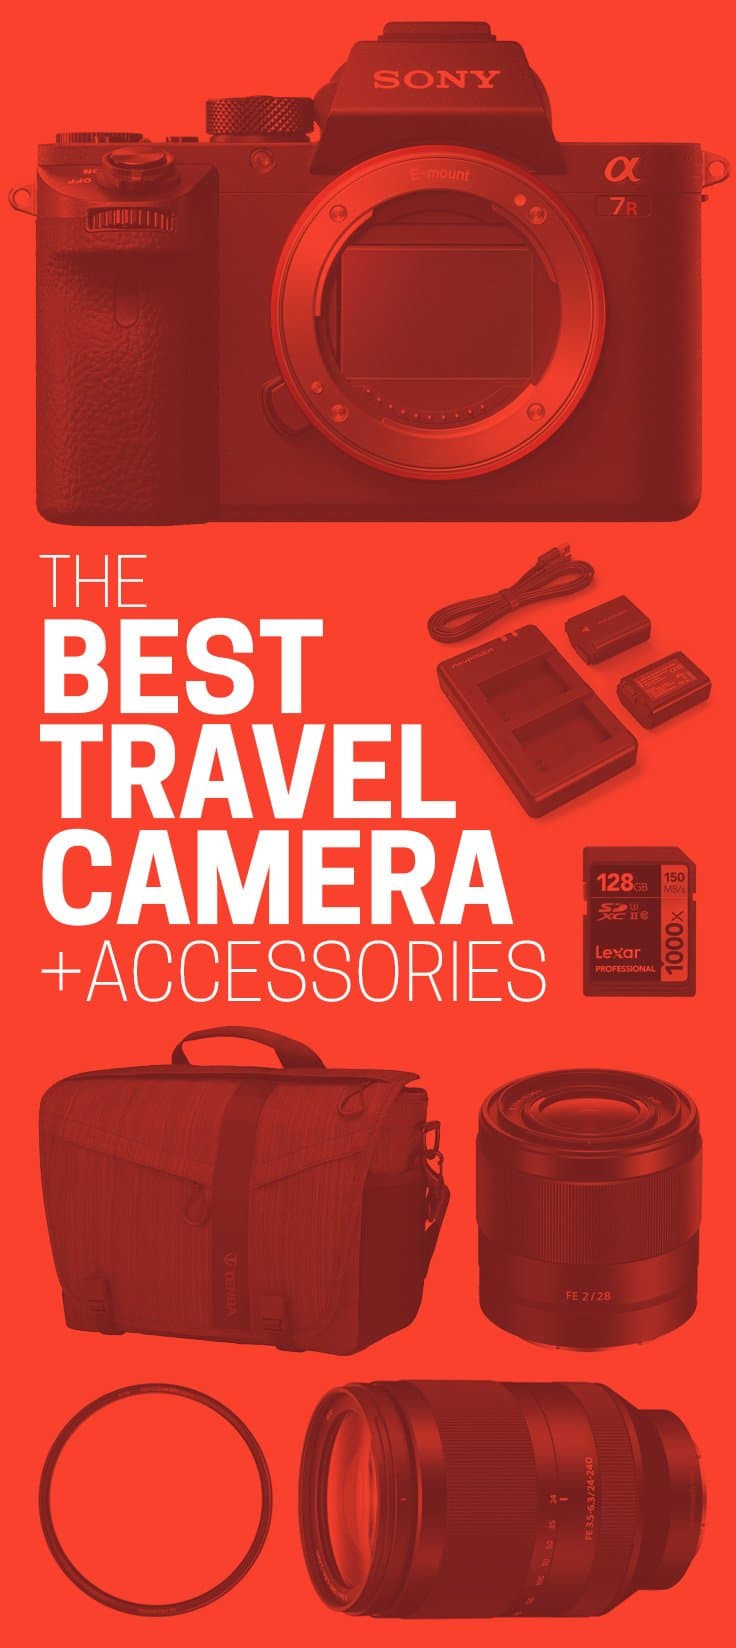 We recently upgraded from a DSLR to a full-frame mirrorless camera... and we haven't looked back! Read on to see what camera we chose, why we think it's the best travel camera, and see our suggestions on what you need to buy when upgrading. A must for amateur travel photographers looking to up their photography game!